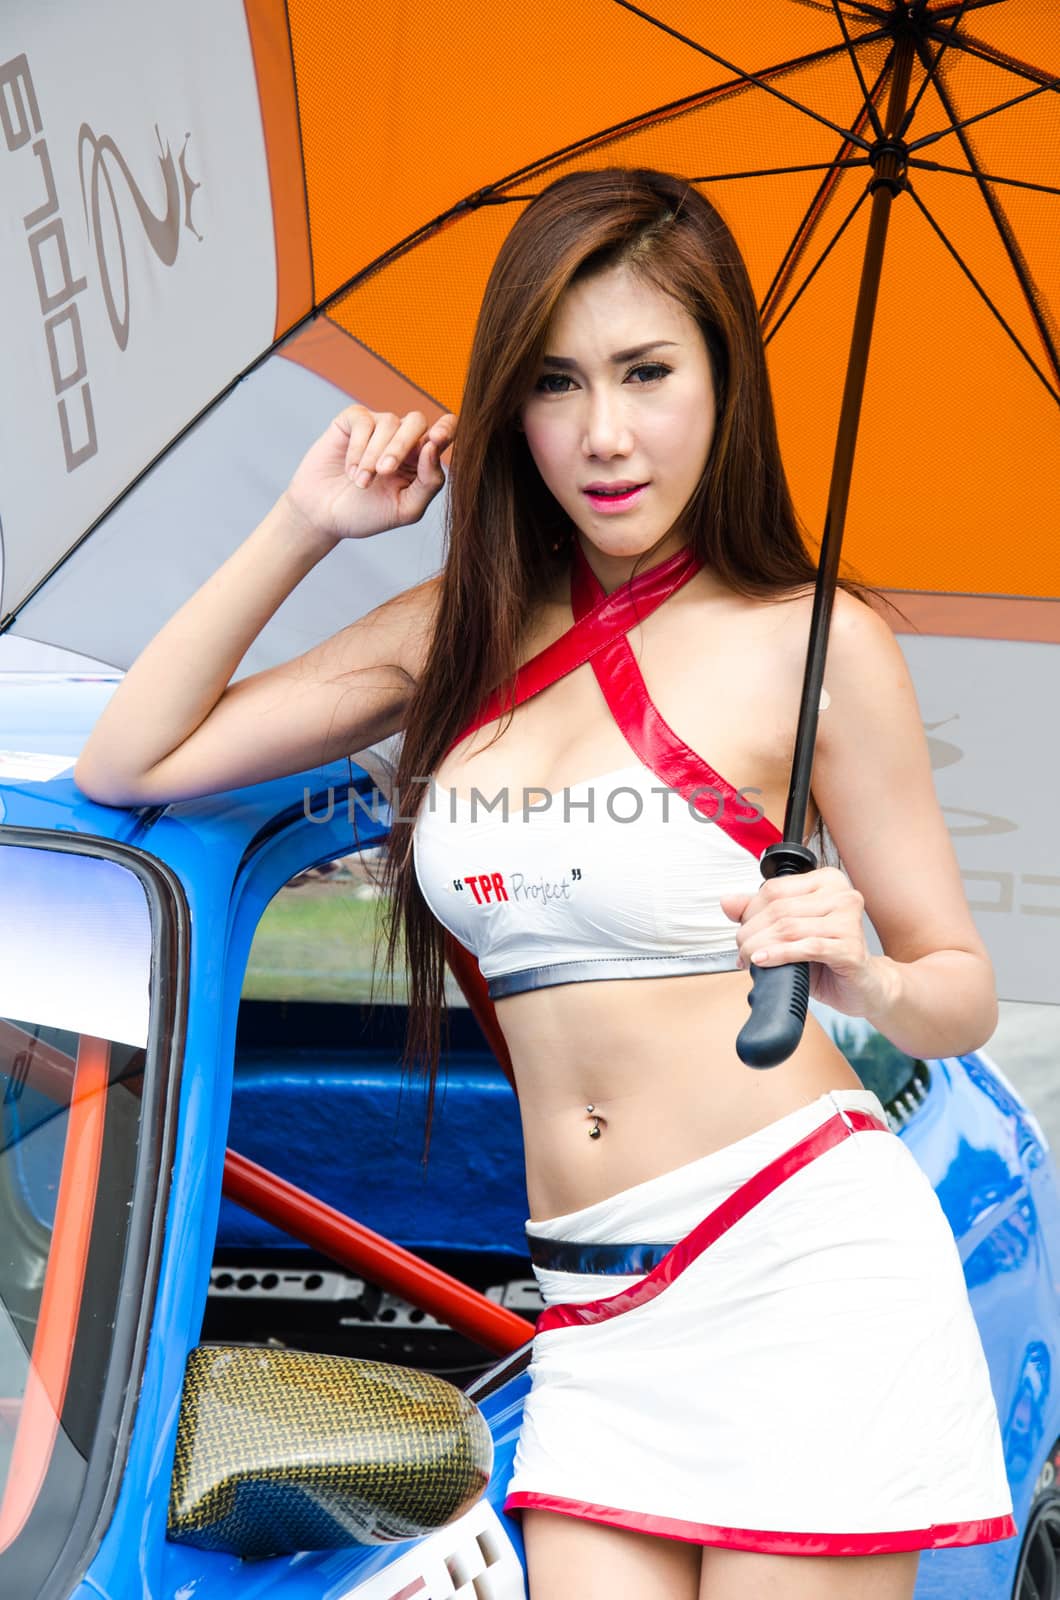 CHOUN BURI - AUGUST 18: Unidentified model with racing car on display at the Thailand Super Series 2013 Race 4 on August 18, 2013 at the Bira International Circuit Pattaya, Thailand.